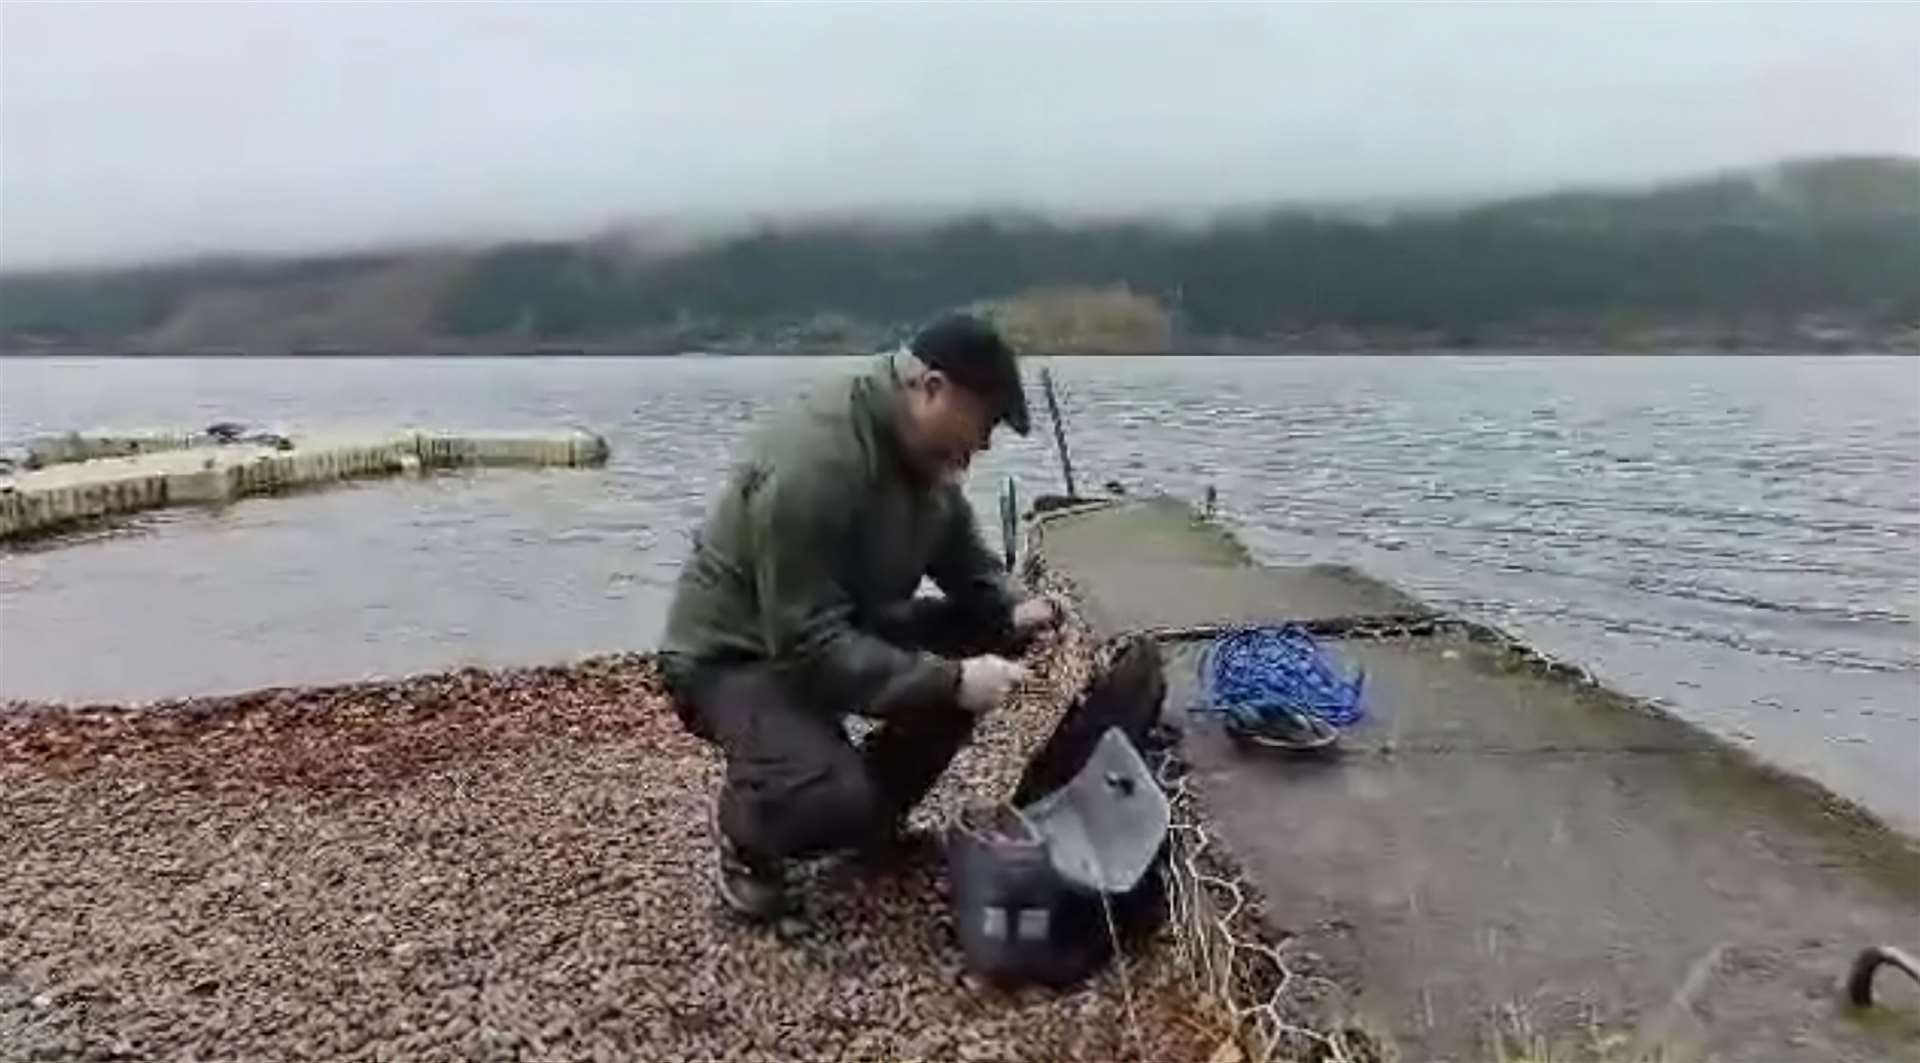 Alan McKenna, of Loch Ness Exploration, sets up the hydrophone on Loch Ness.